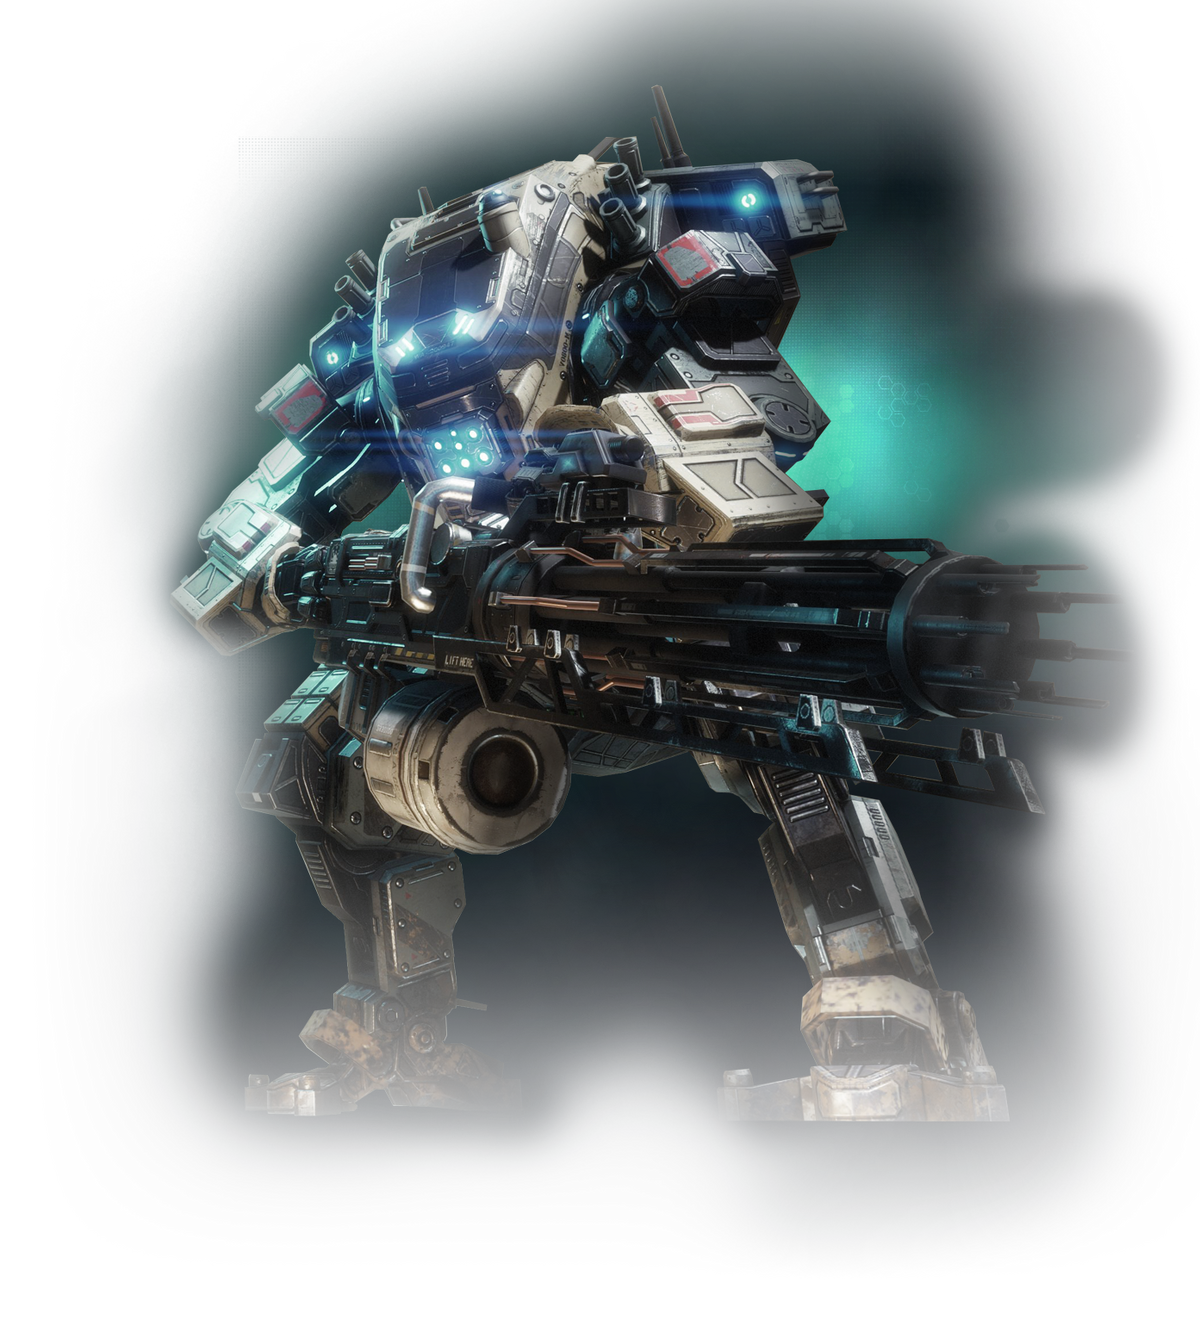 NVIDIA Showcase: Dominating the opposition as Titanfall 2's Legion and Tone